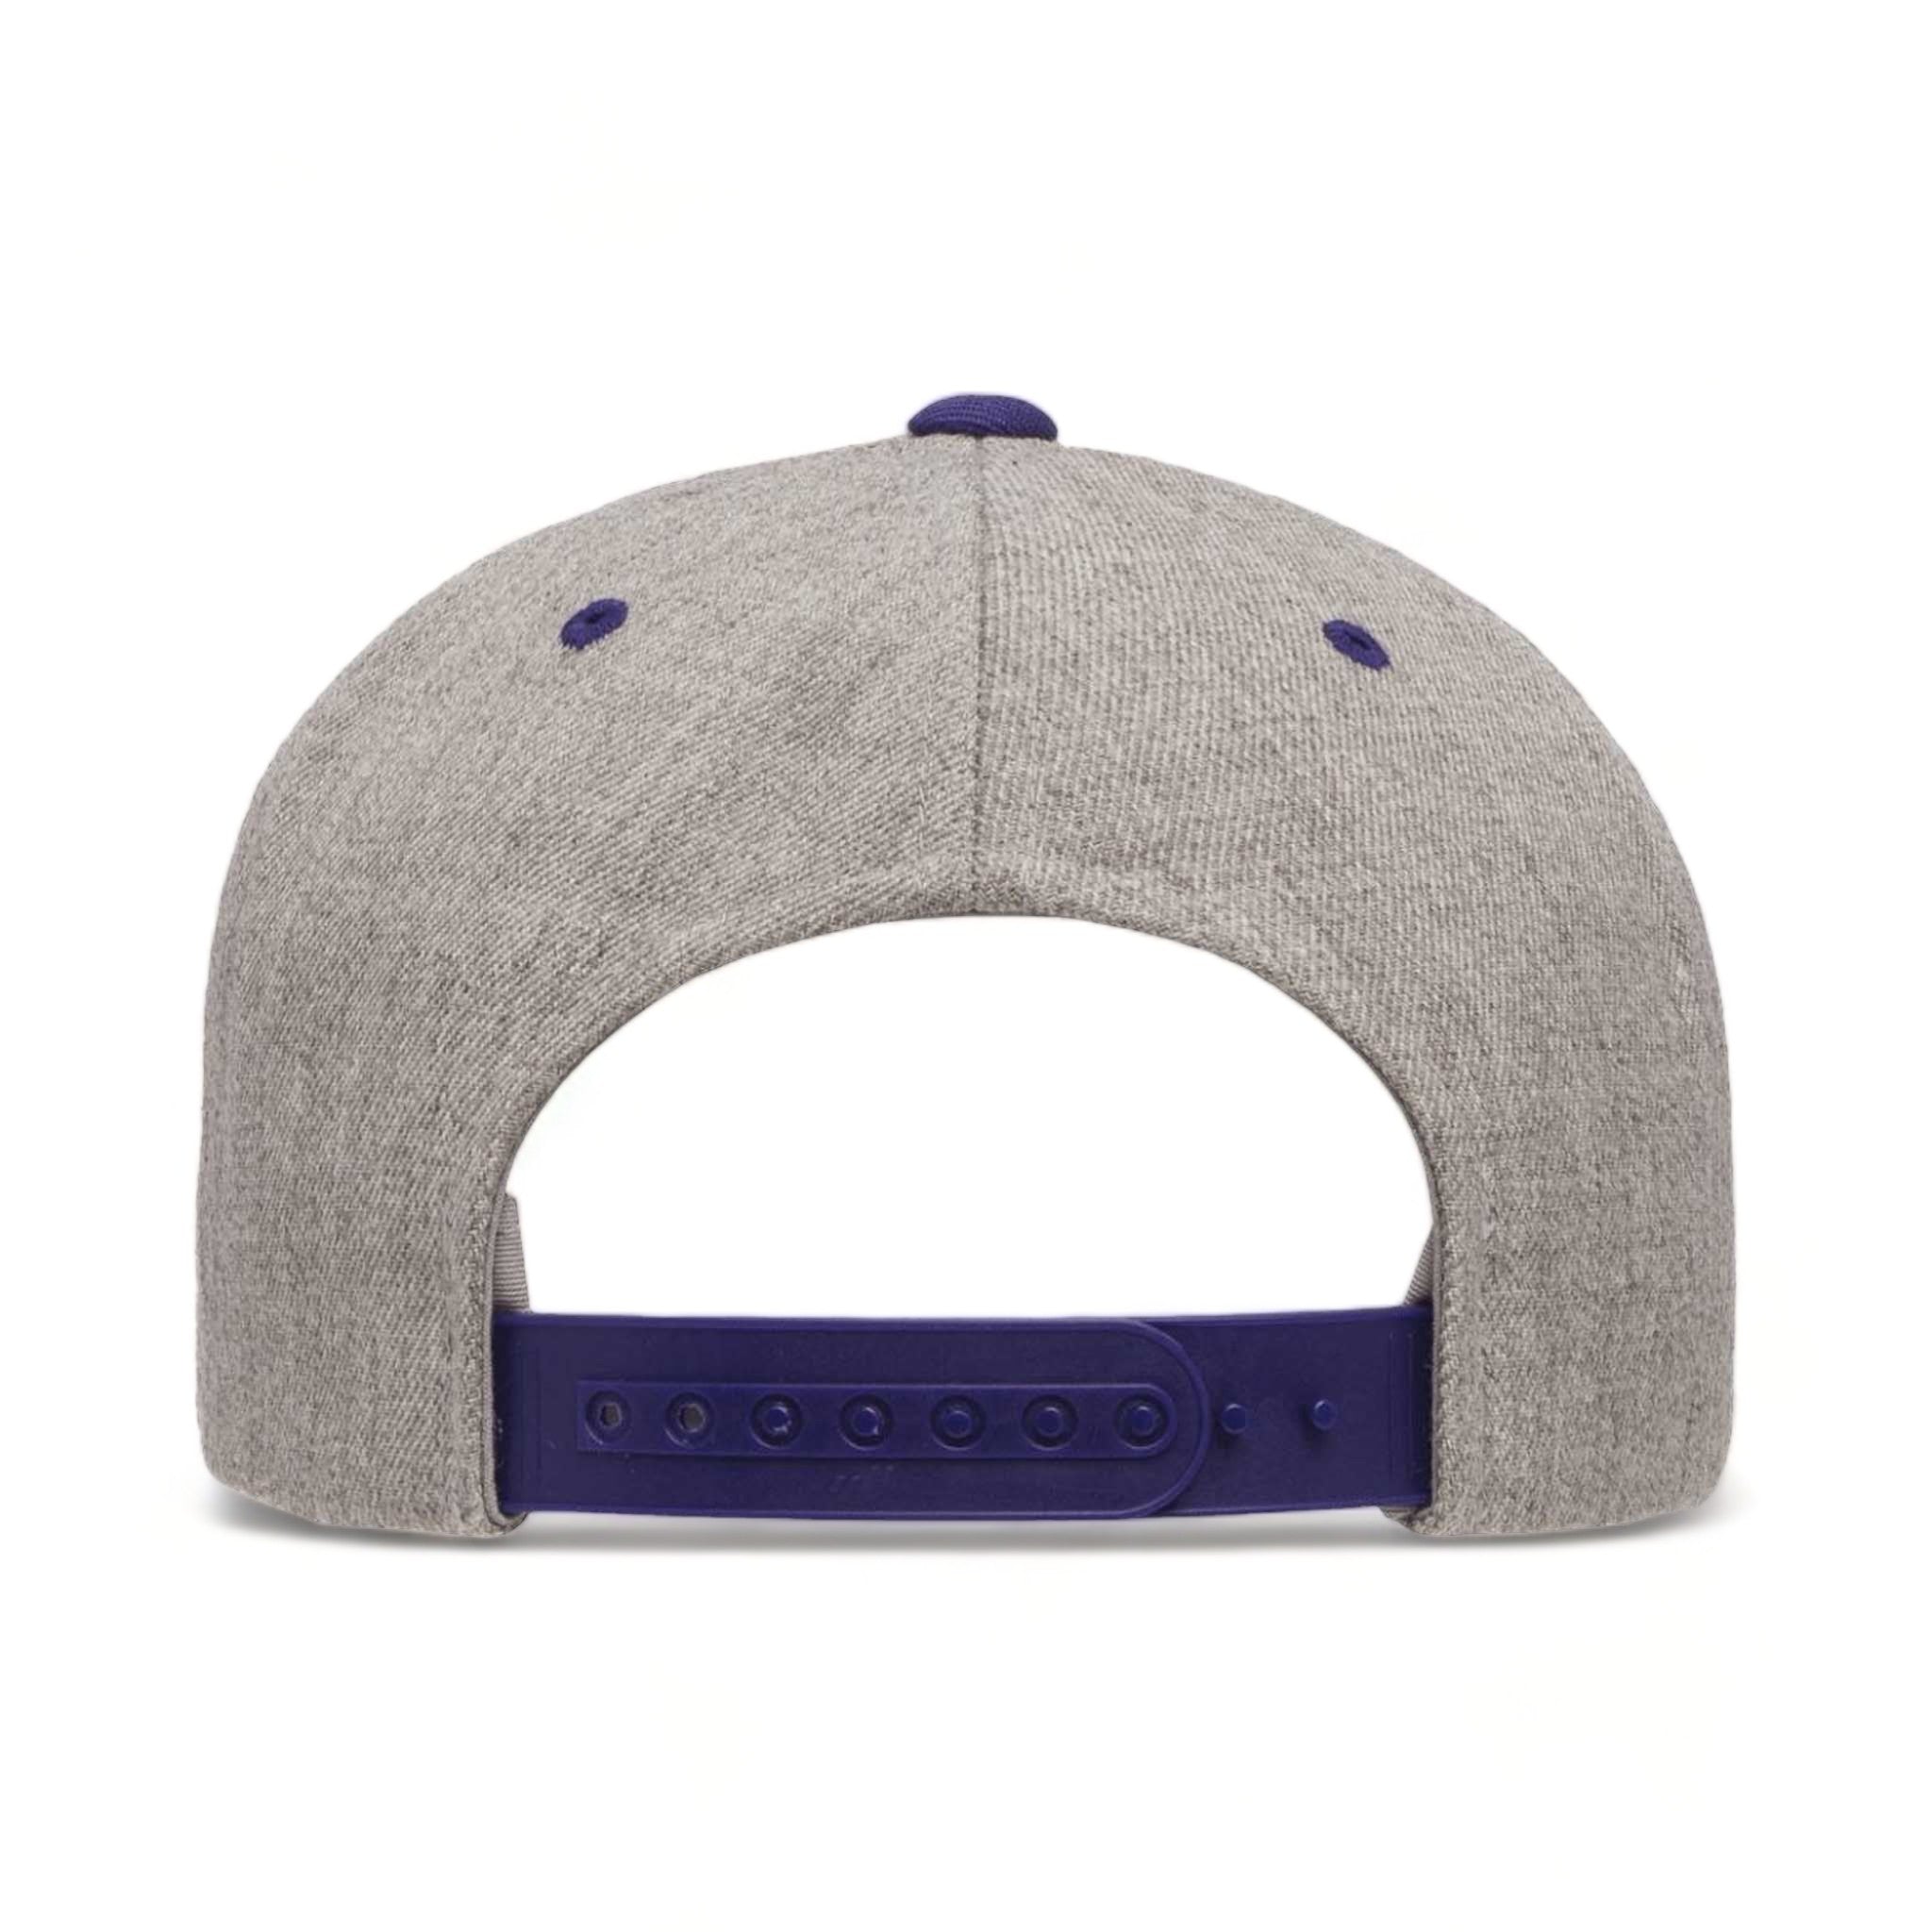 Back view of YP Classics 6089M custom hat in heather grey and purple